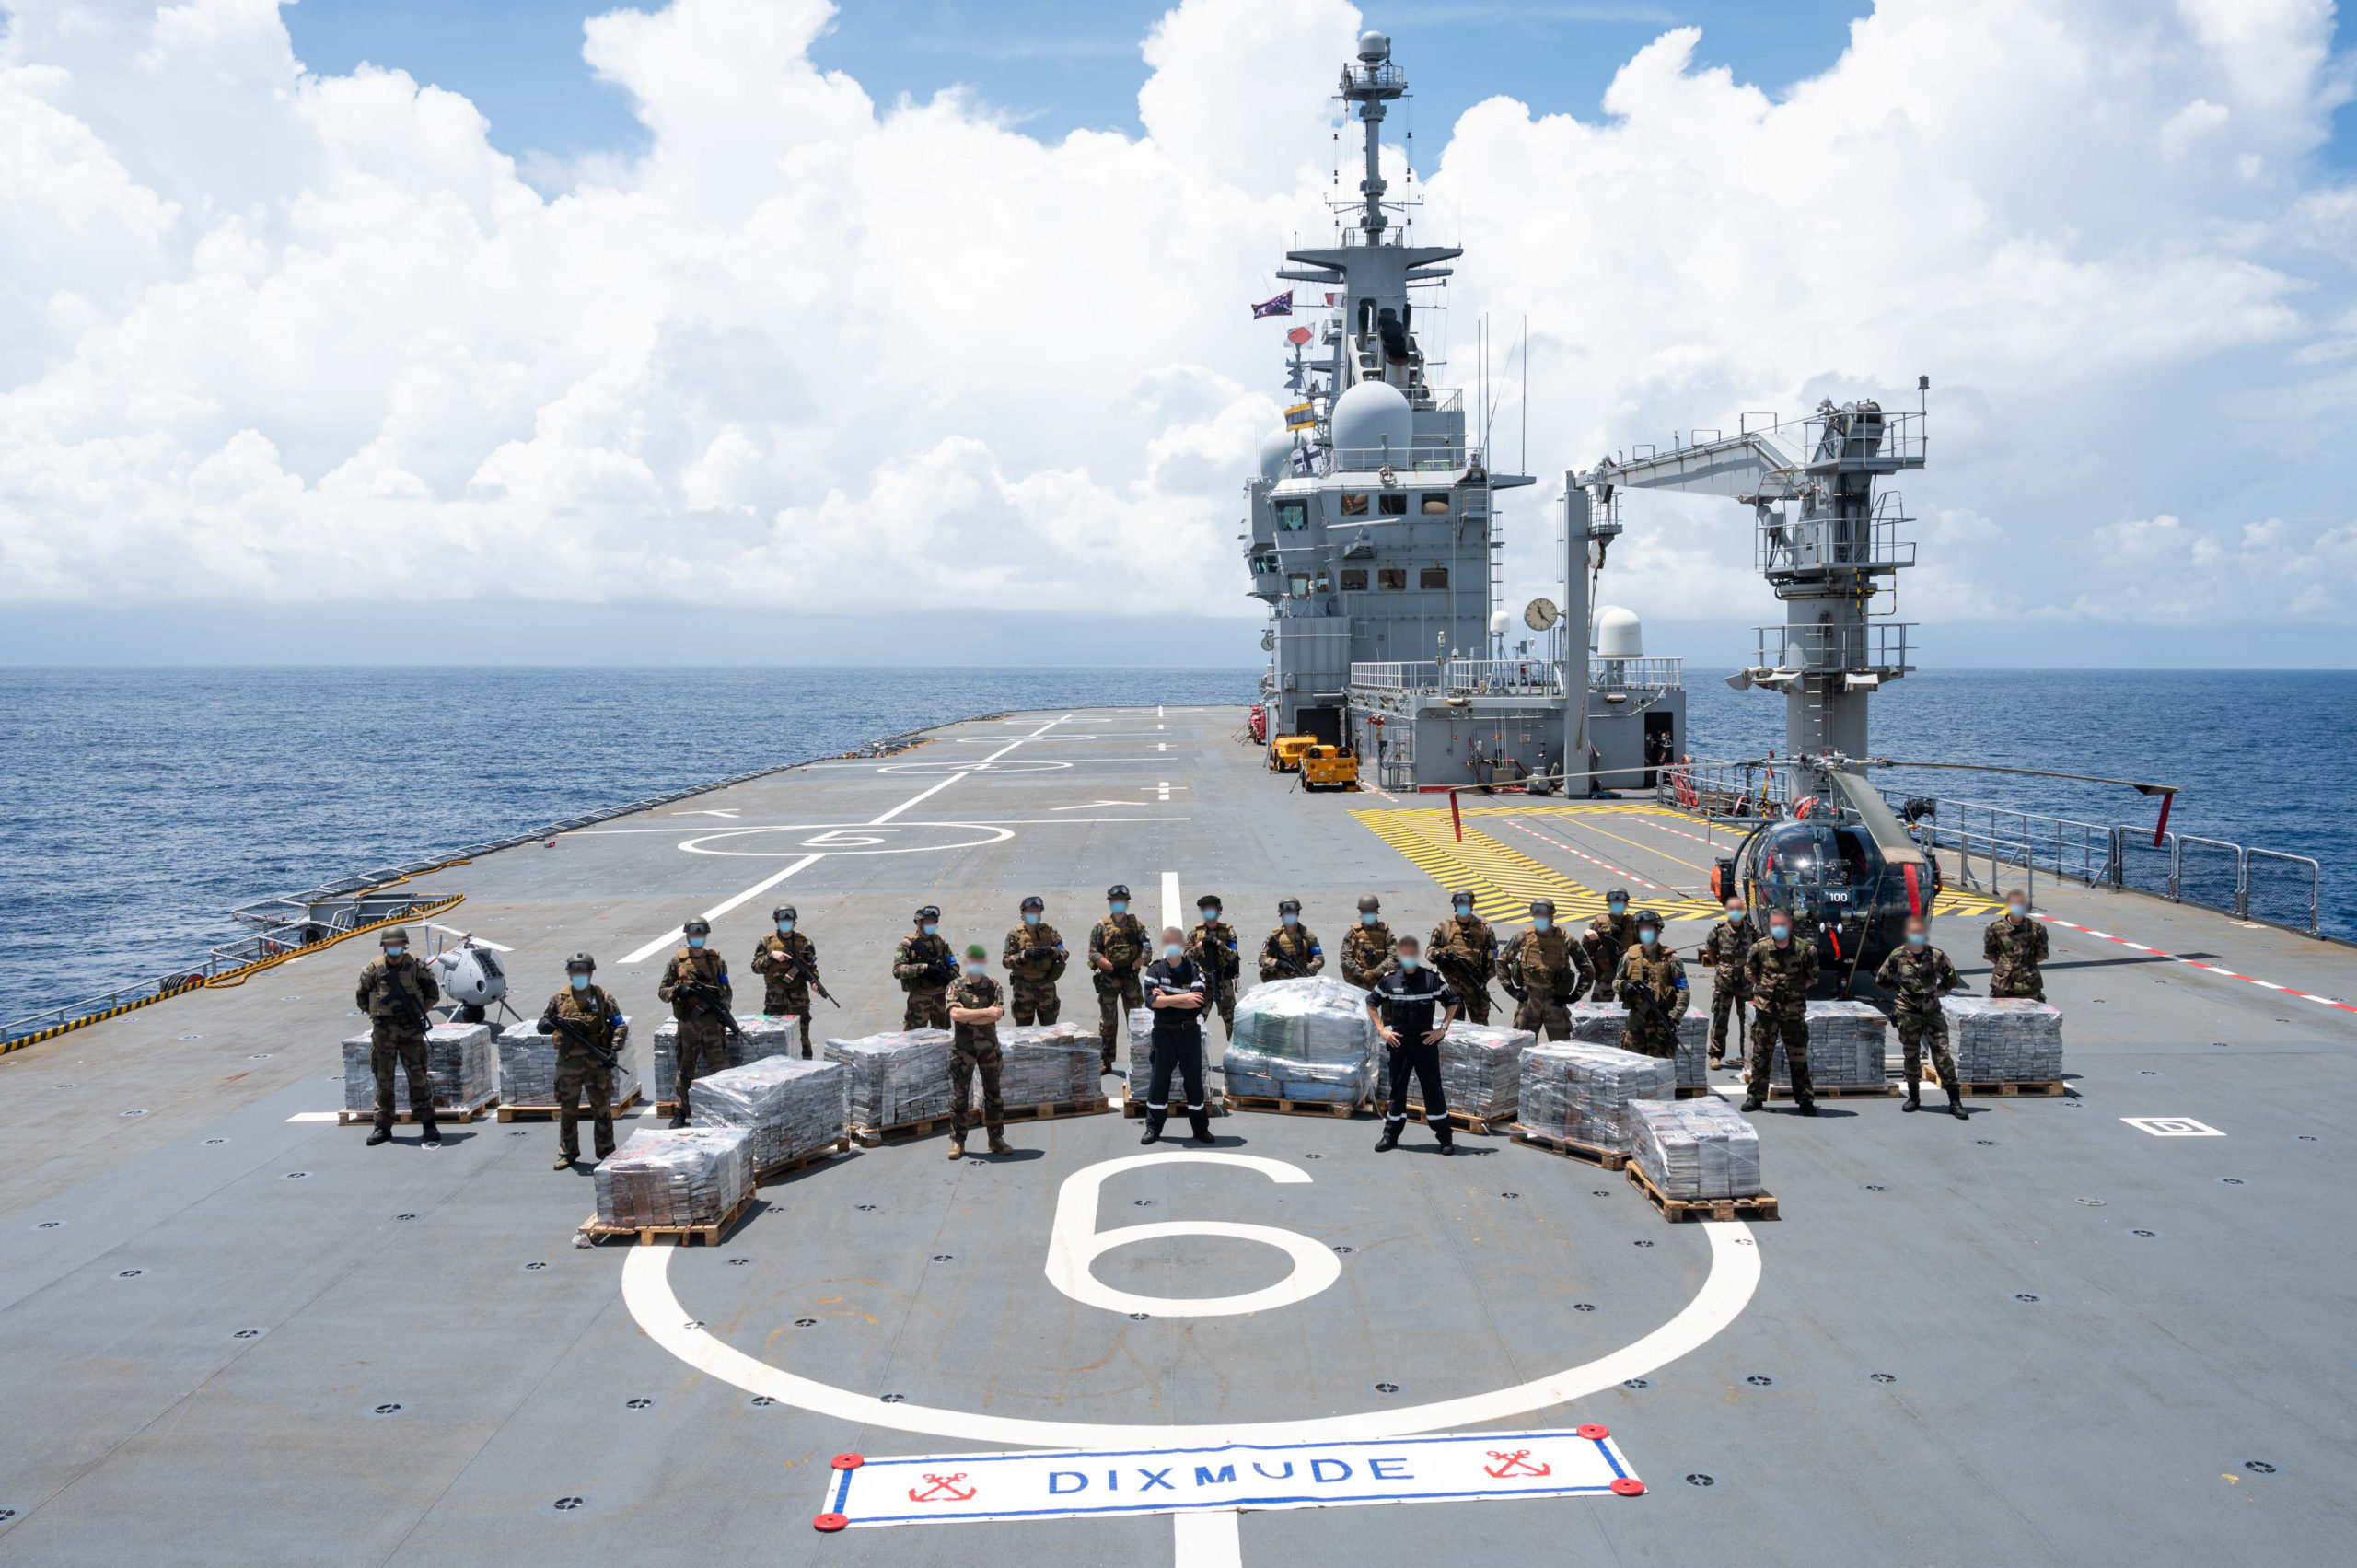 Record cocaine seizure by the French Navy in the Gulf of Guinea